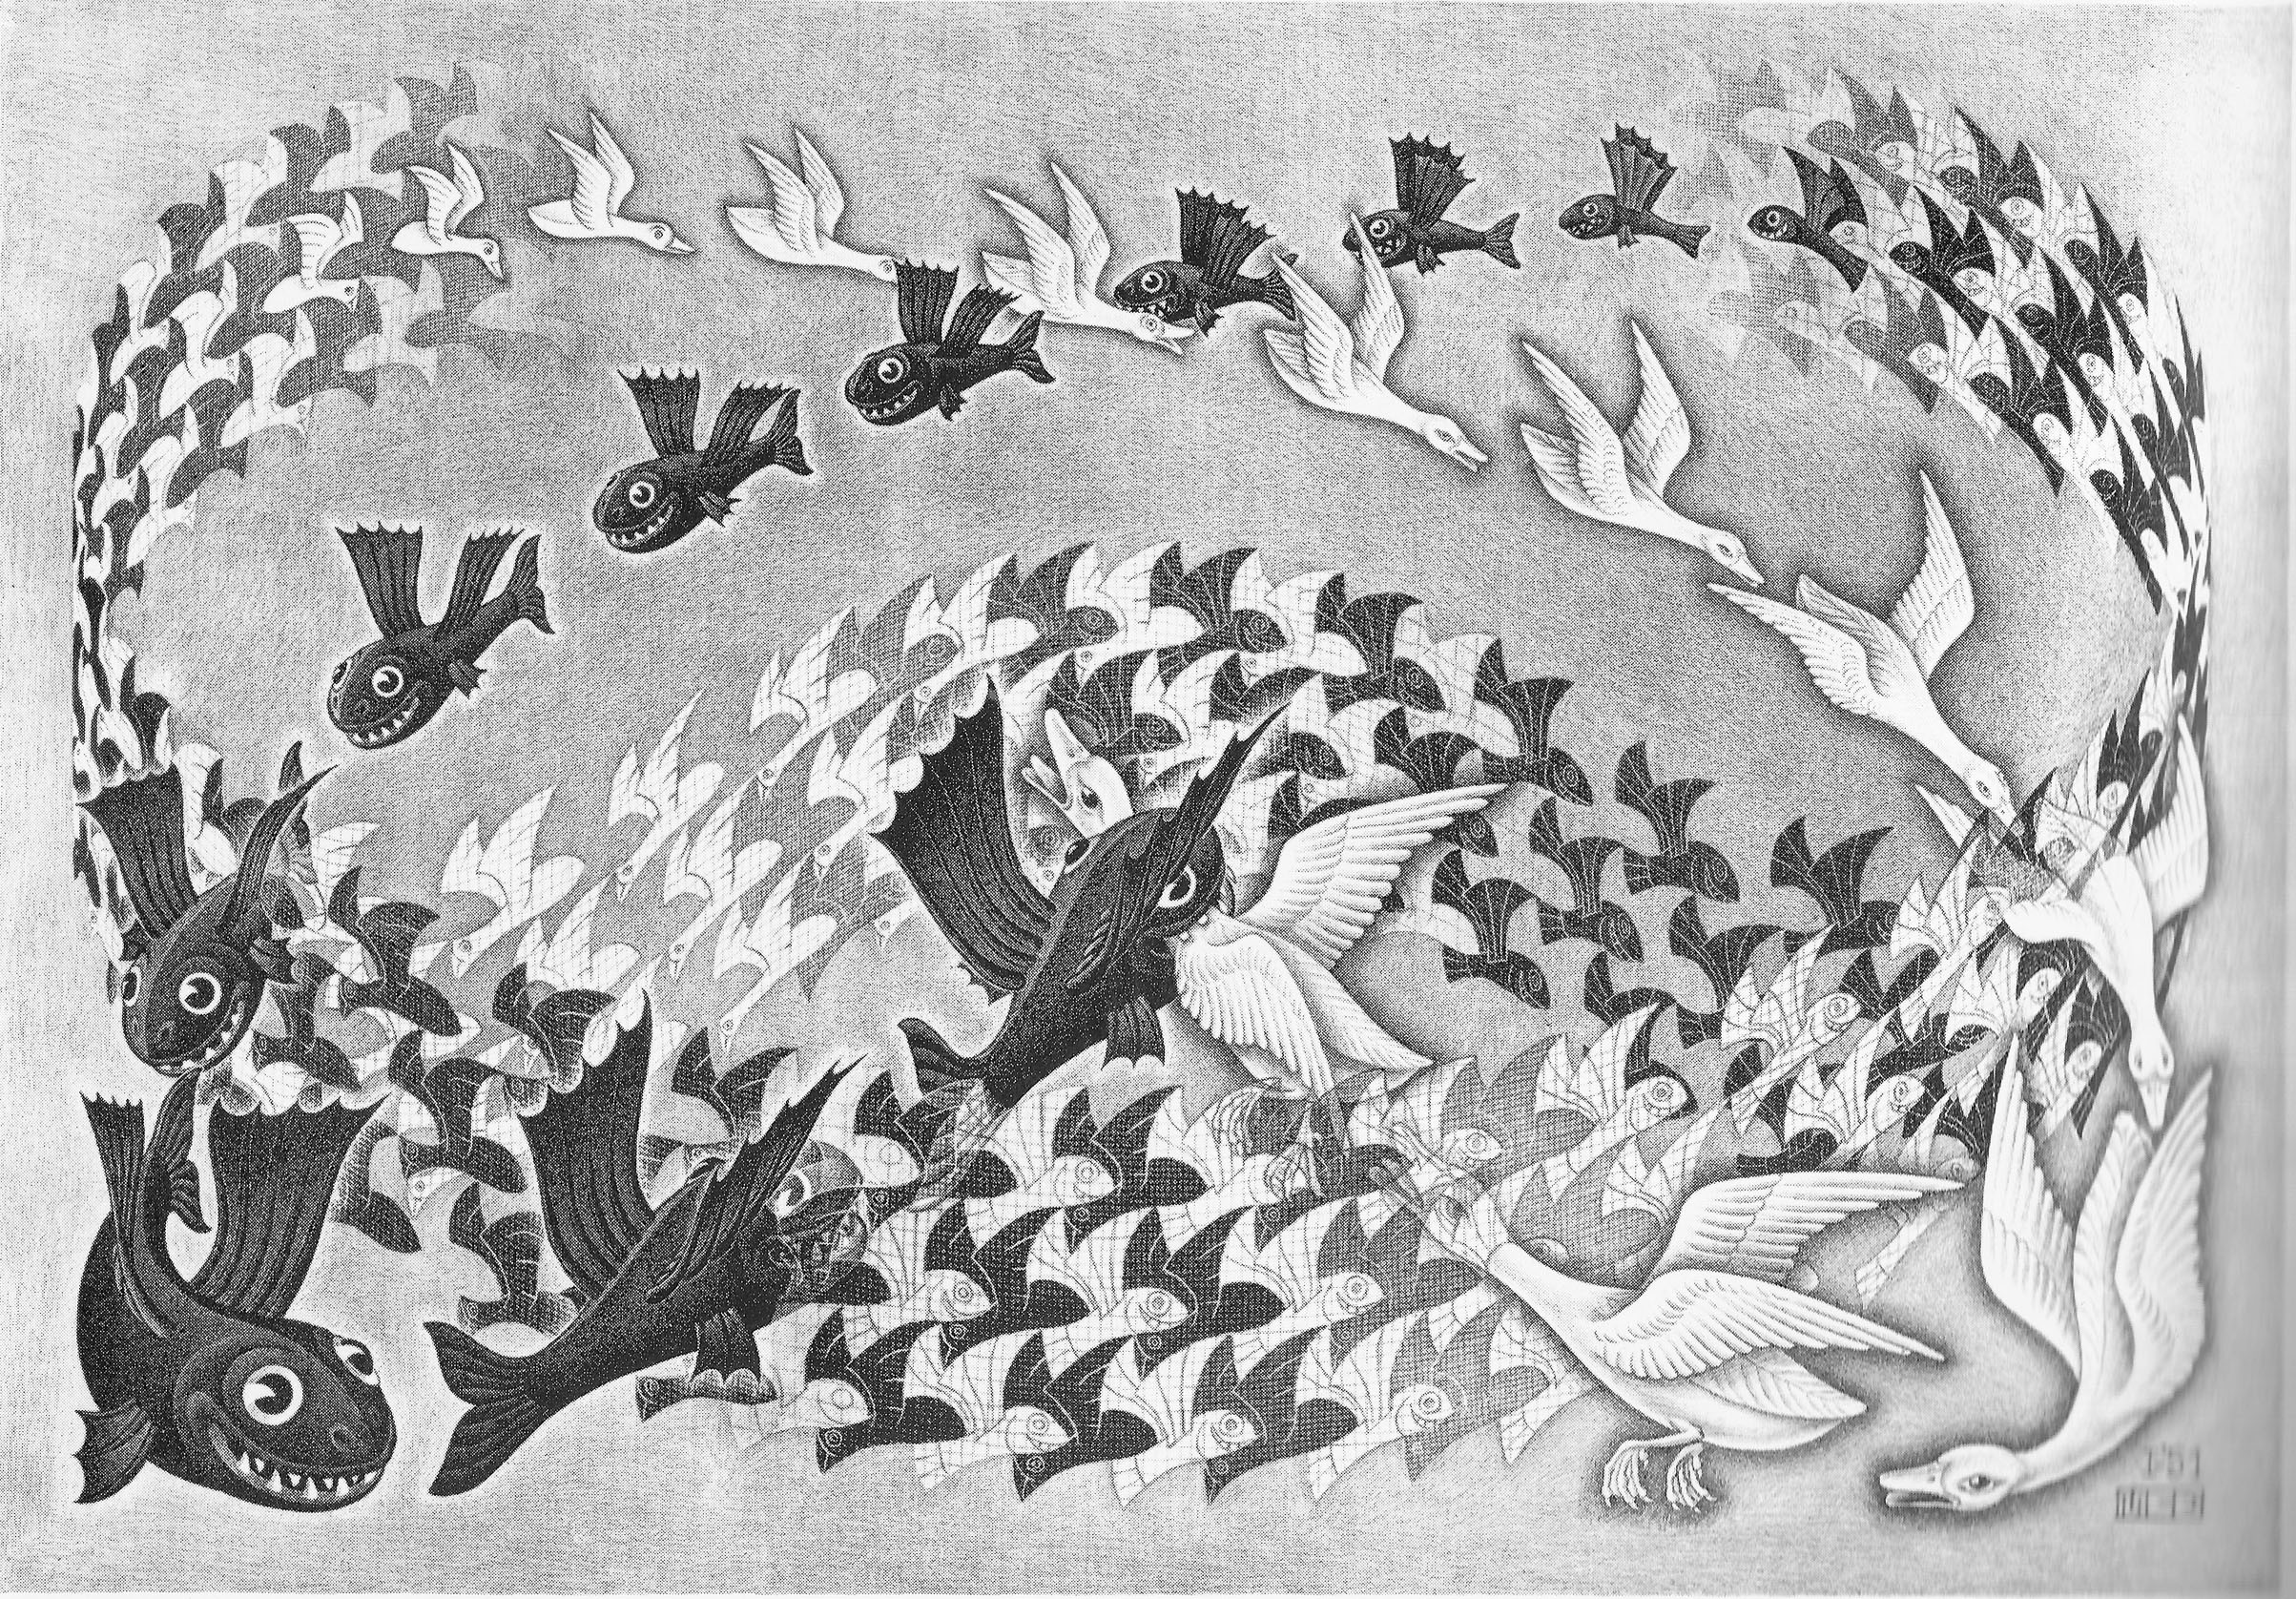 General 2407x1676 artwork M. C. Escher monochrome psychedelic animals fish birds geese flying lithograph